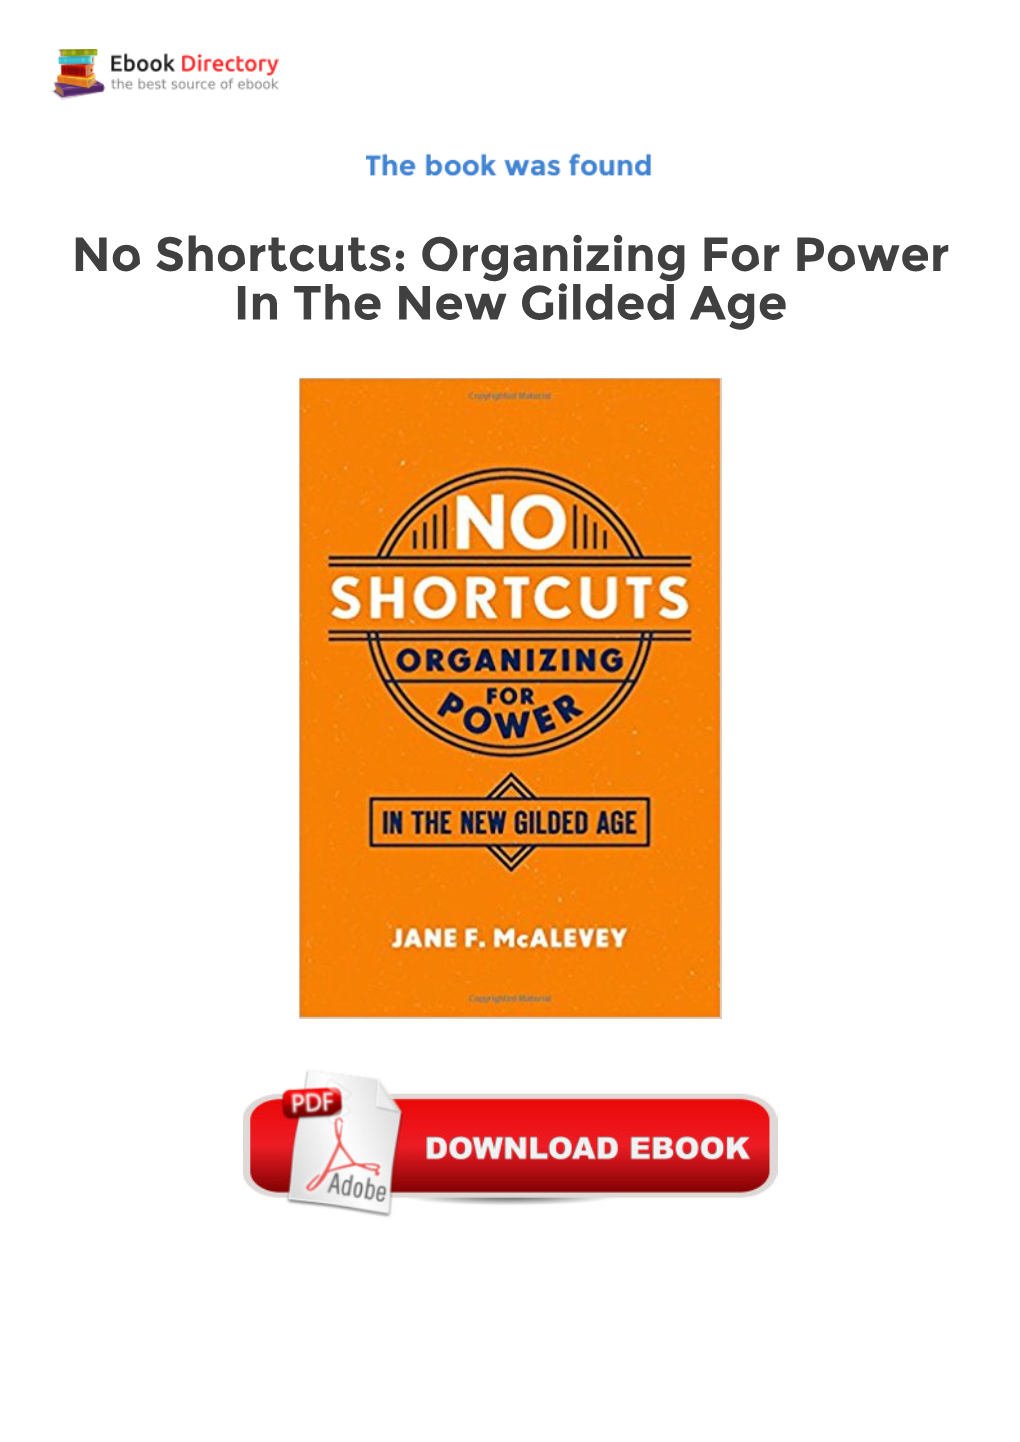 No Shortcuts: Organizing for Power in the New Gilded Age Download